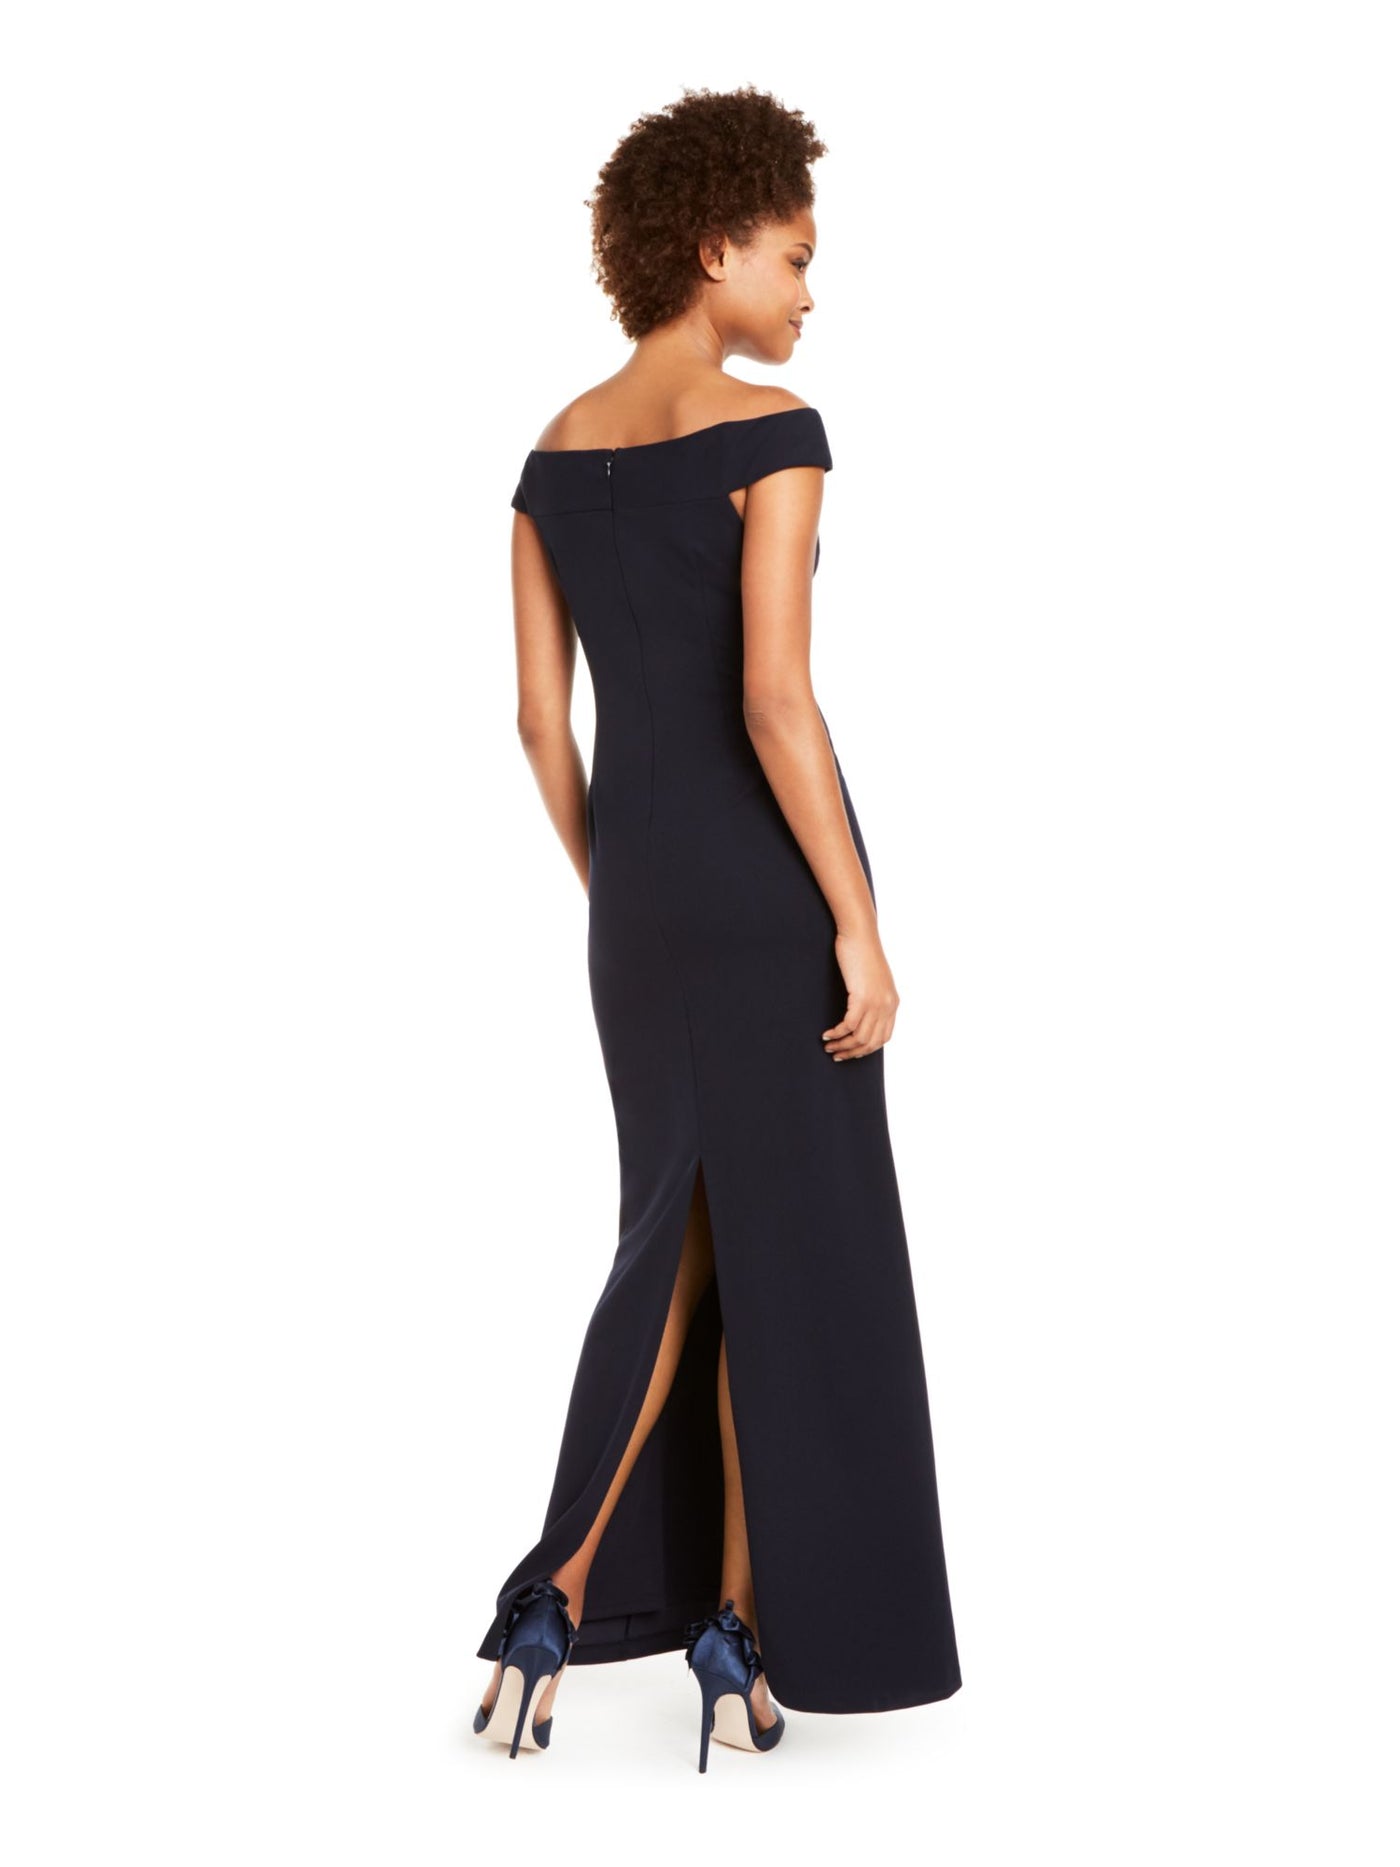 ADRIANNA PAPELL Womens Navy Slitted Cap Sleeve Off Shoulder Full-Length Formal Sheath Dress 16